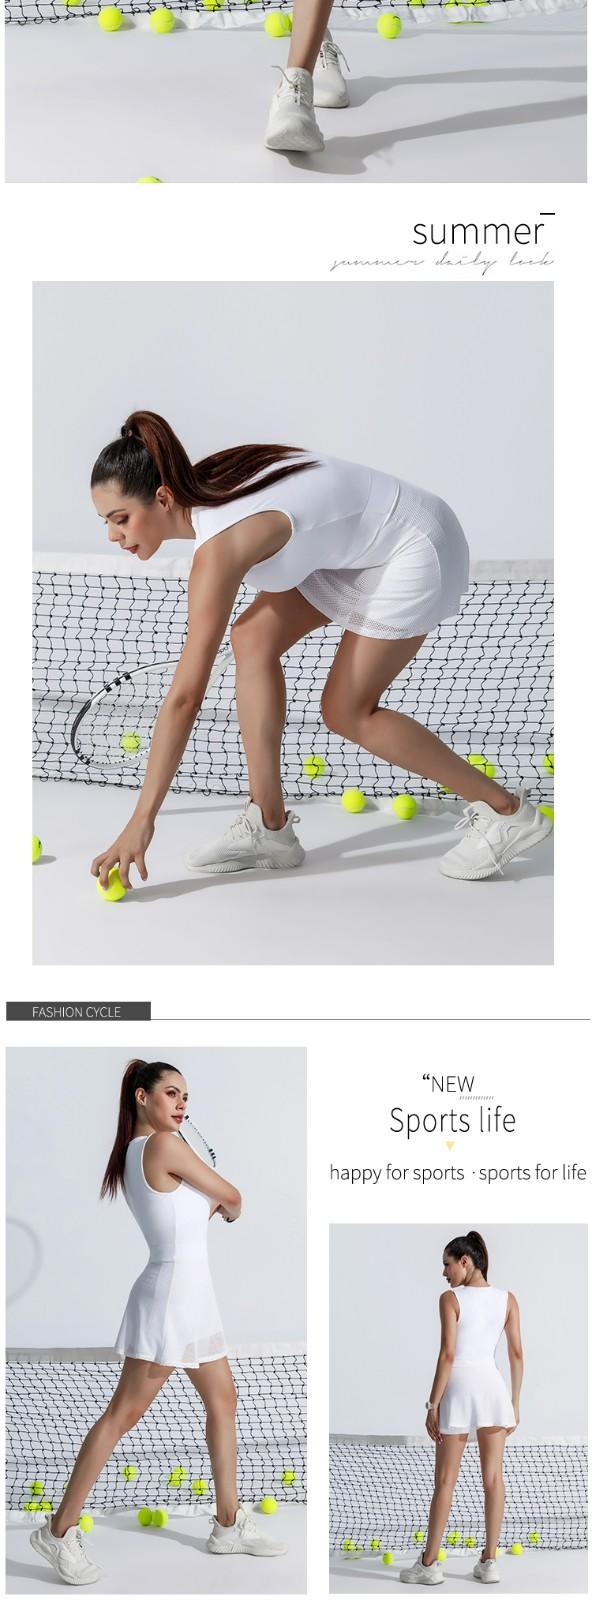 custom tennis outfit woman for sport